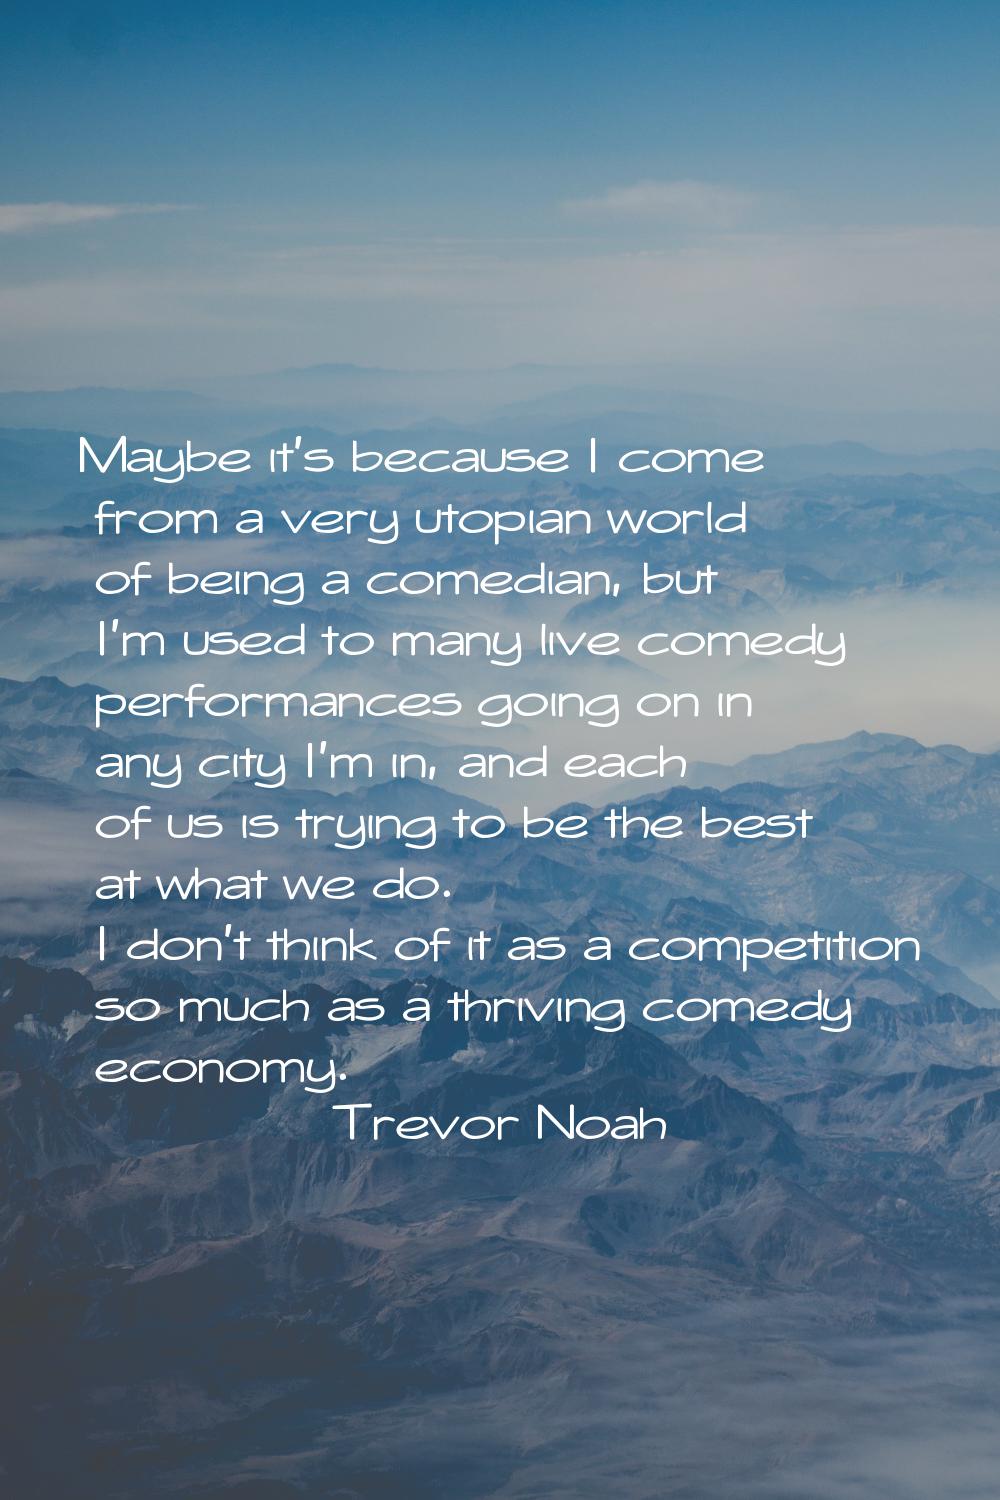 Maybe it's because I come from a very utopian world of being a comedian, but I'm used to many live 